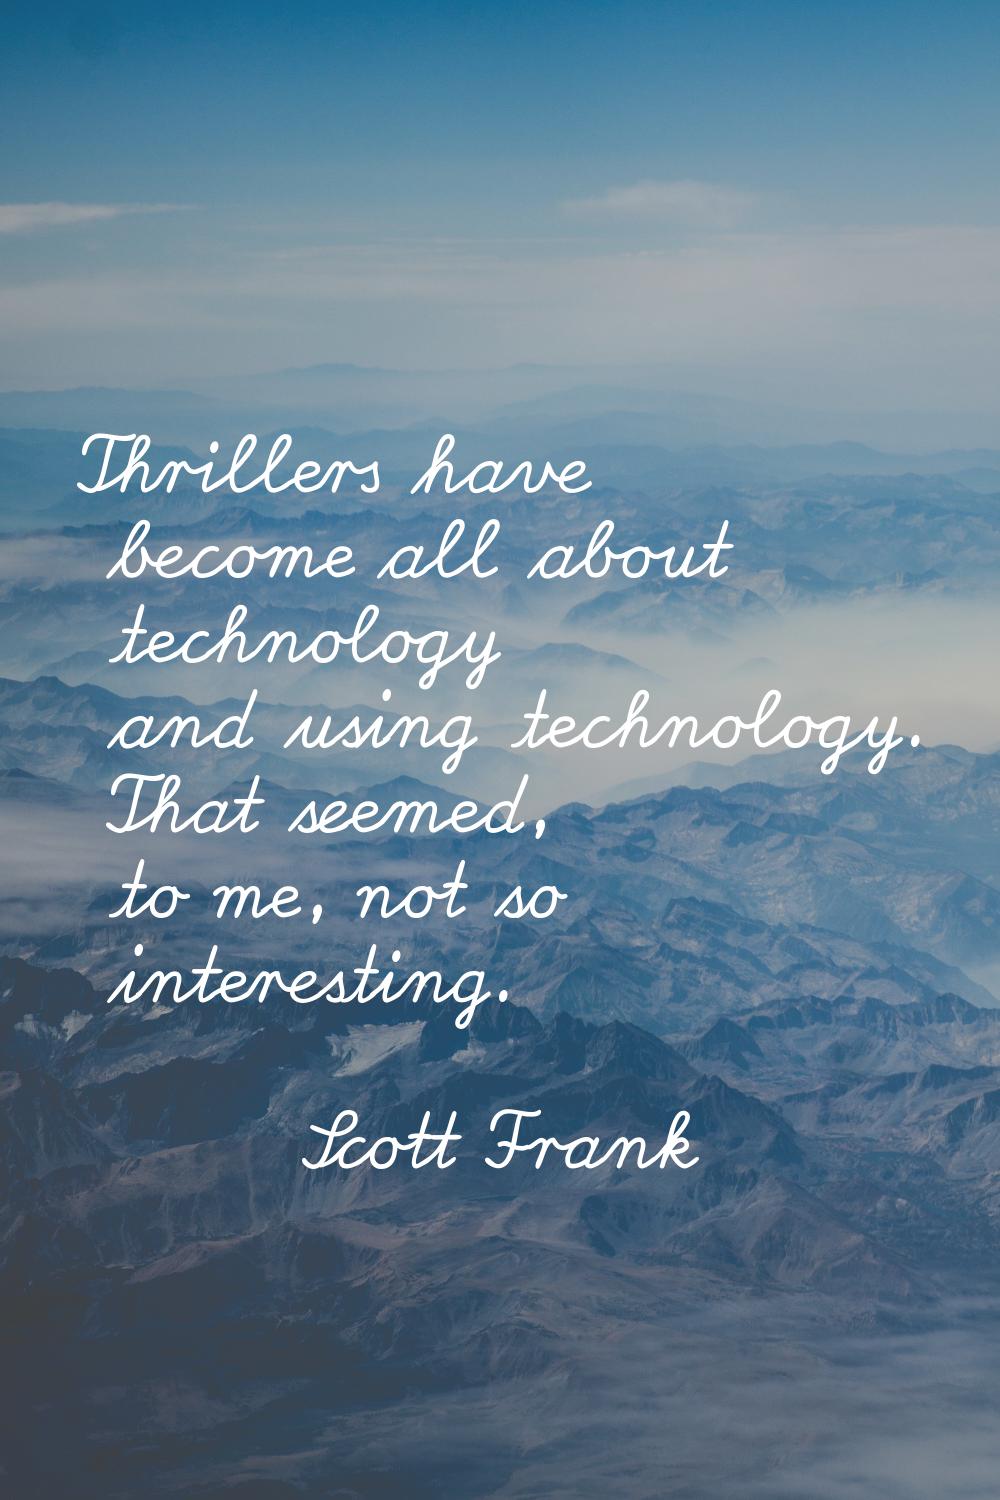 Thrillers have become all about technology and using technology. That seemed, to me, not so interes